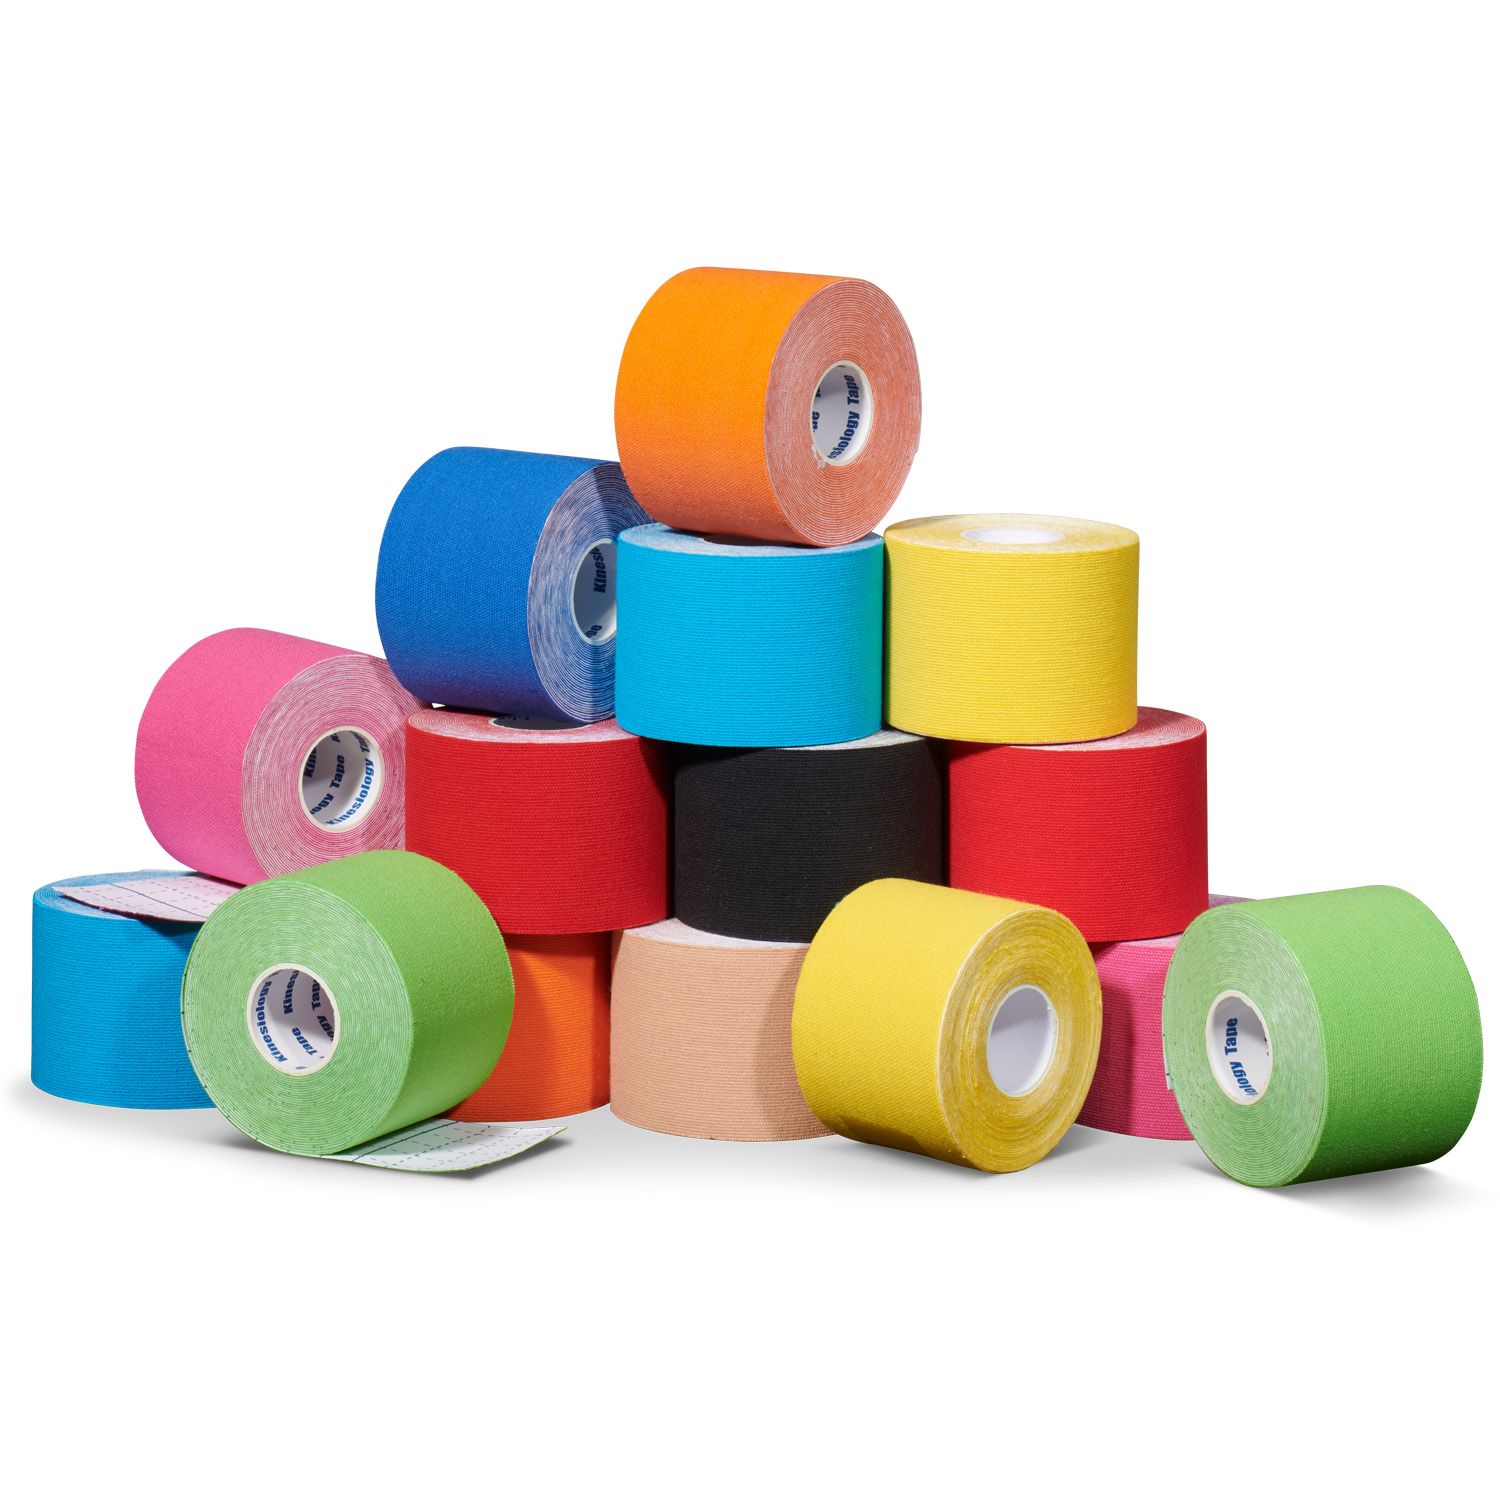 Kinesiology tape 12 rolls plus 3 rolls for free for sale